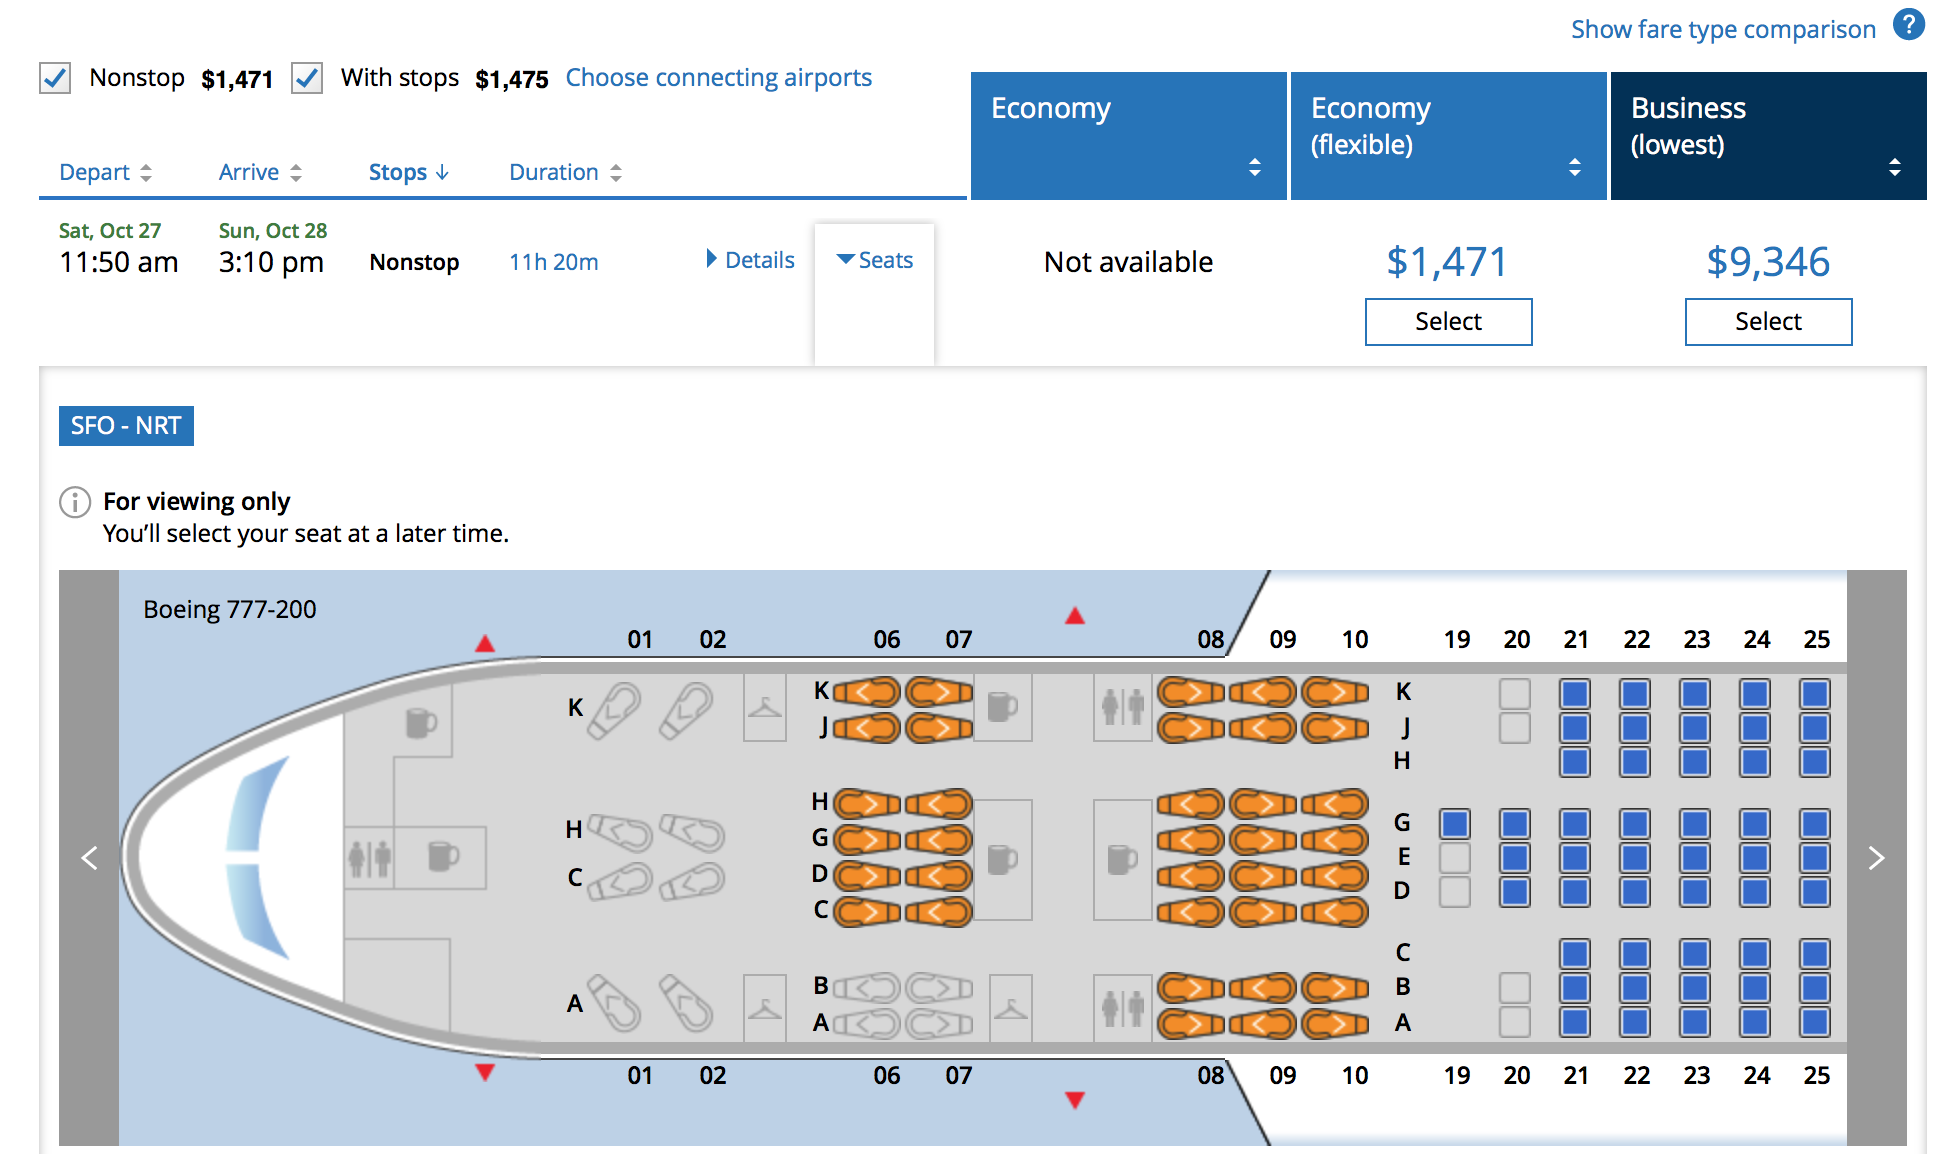 United Airlines 777 200 Seating Chart